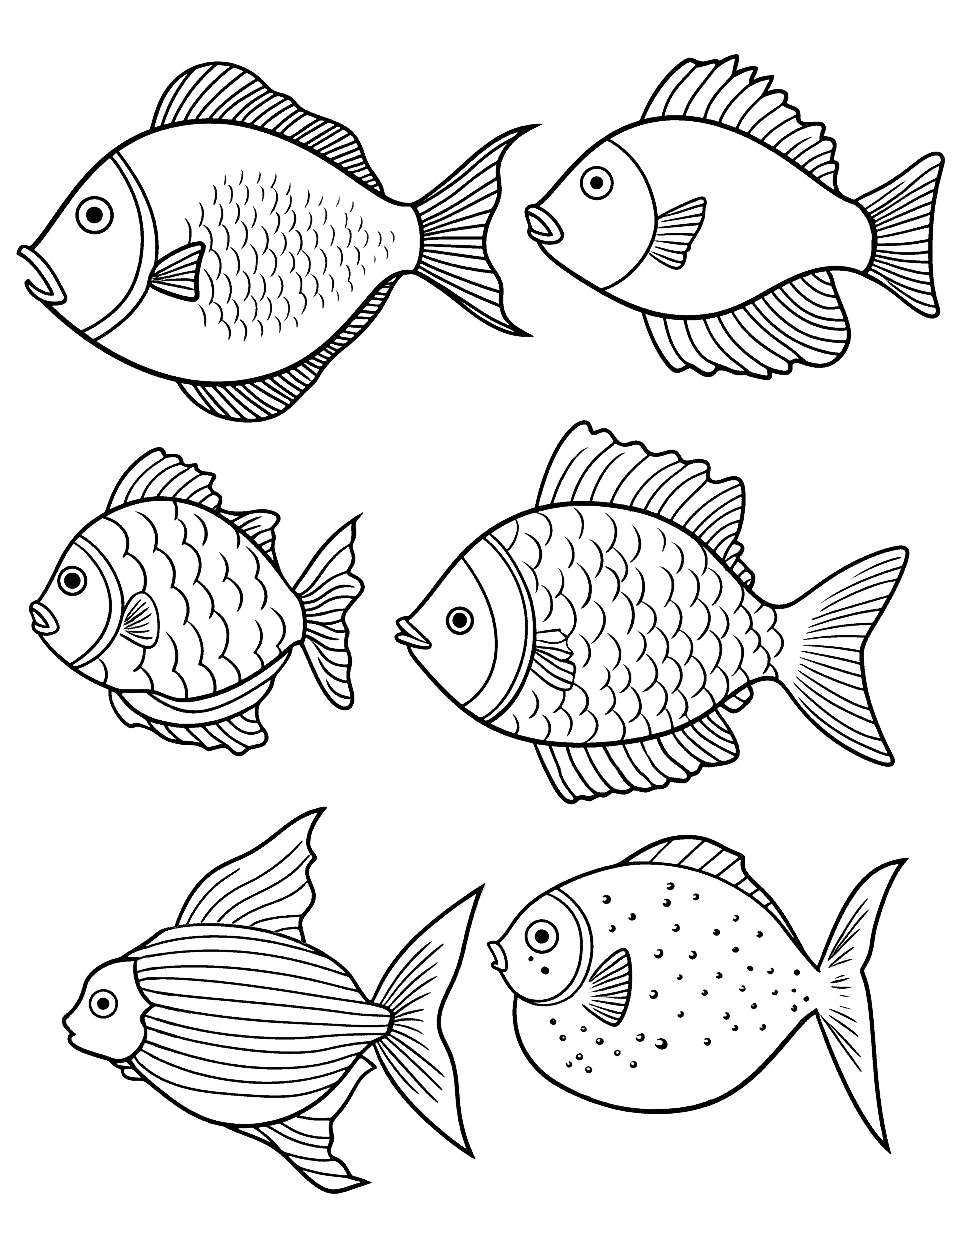 Saltwater Fish Diversity Coloring Page - A collection of saltwater fish, each with its own unique shape and characteristics.